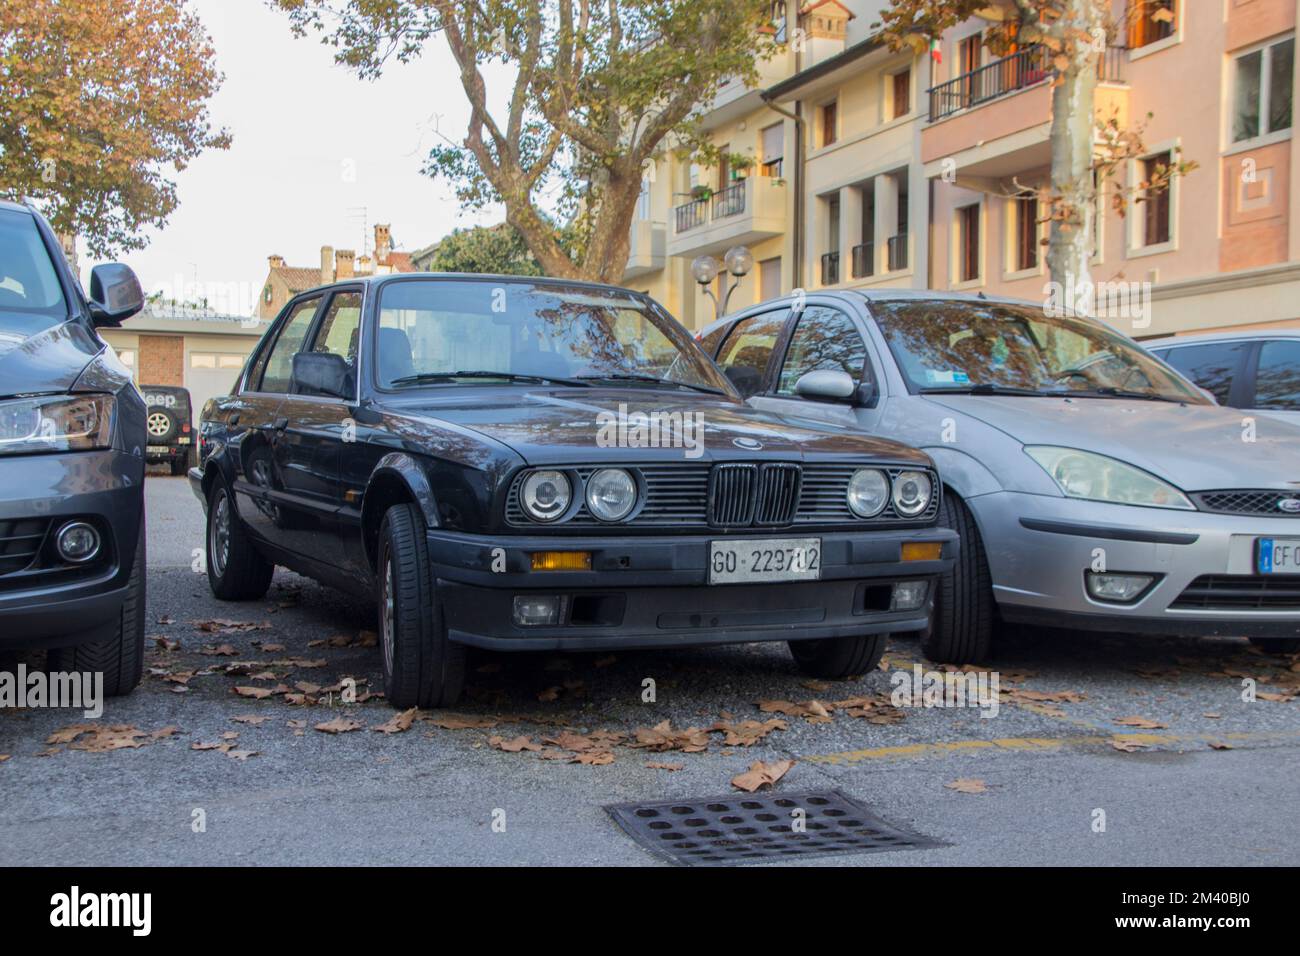 Black BMW 318i (1989)Parking on a City Car Park. View from Front Stock Photo